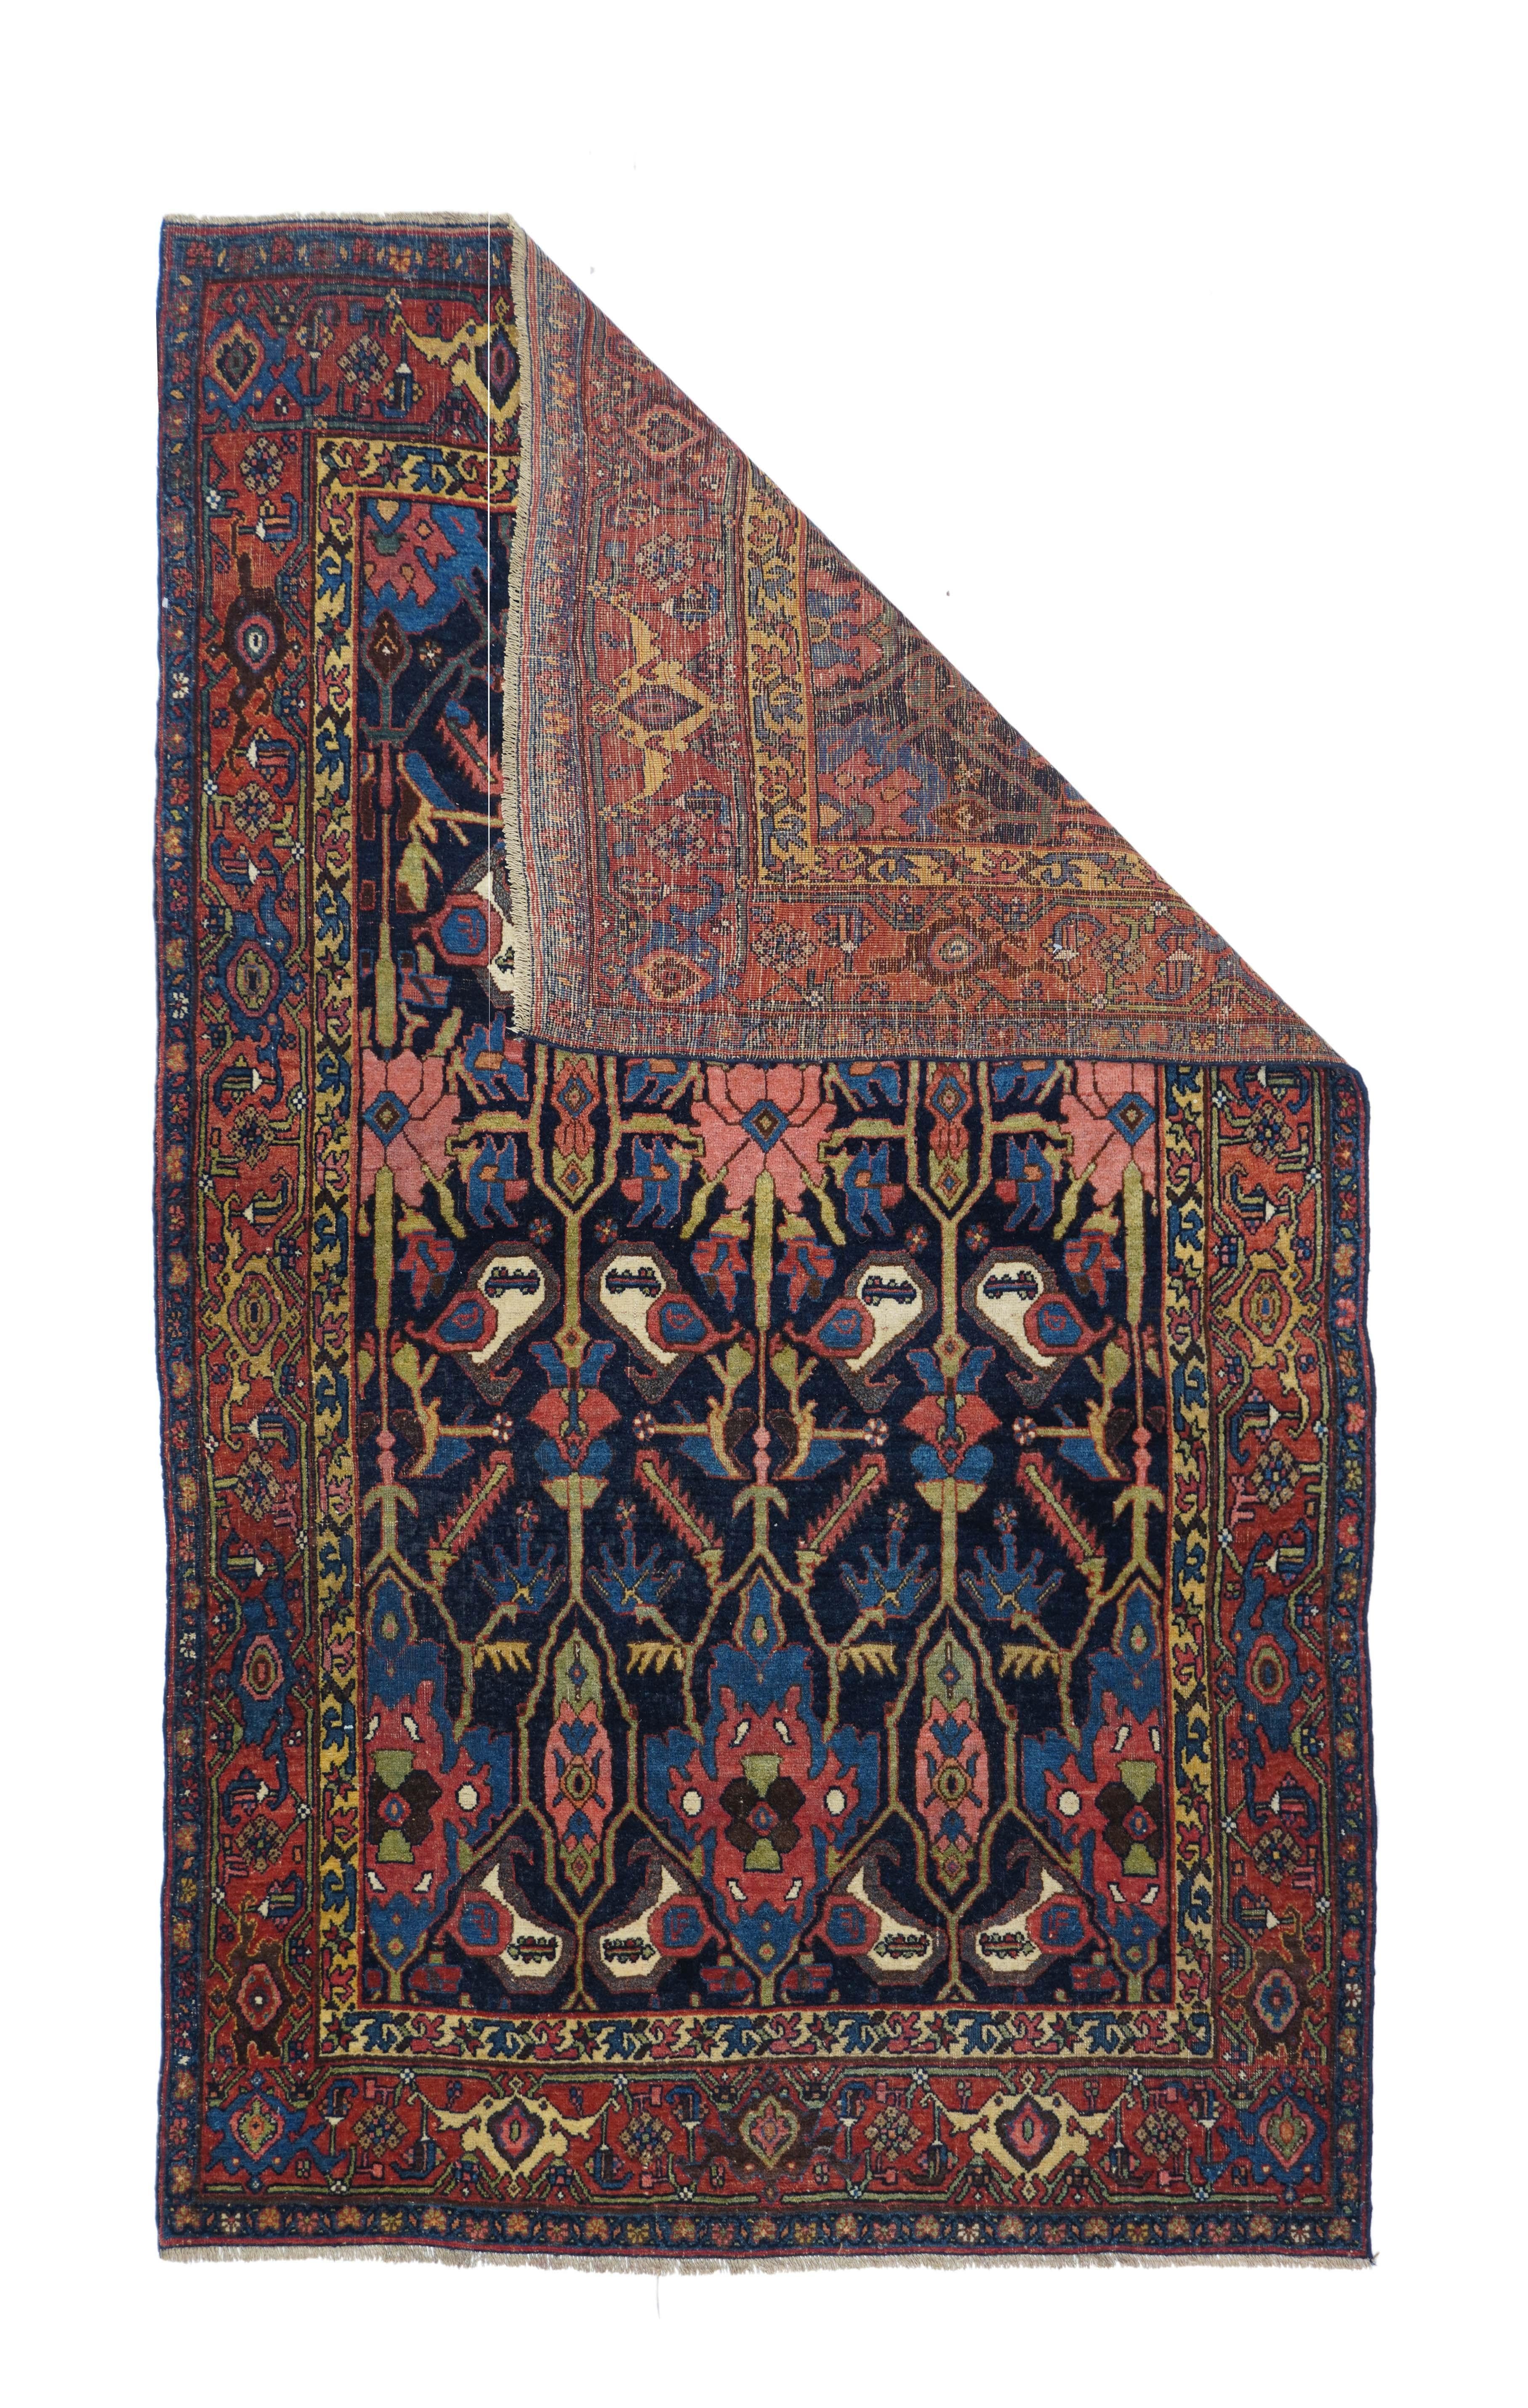 Antique Bidjar Rug 4'1'' x 6'11''. This extremely solid and robust, well-woven Kurdish city scatter presents a navy field with a cartouche lattice enclosing botehs, palmettes, ragged rosettes and tall polygons. Reversing turtle palmettes decorate